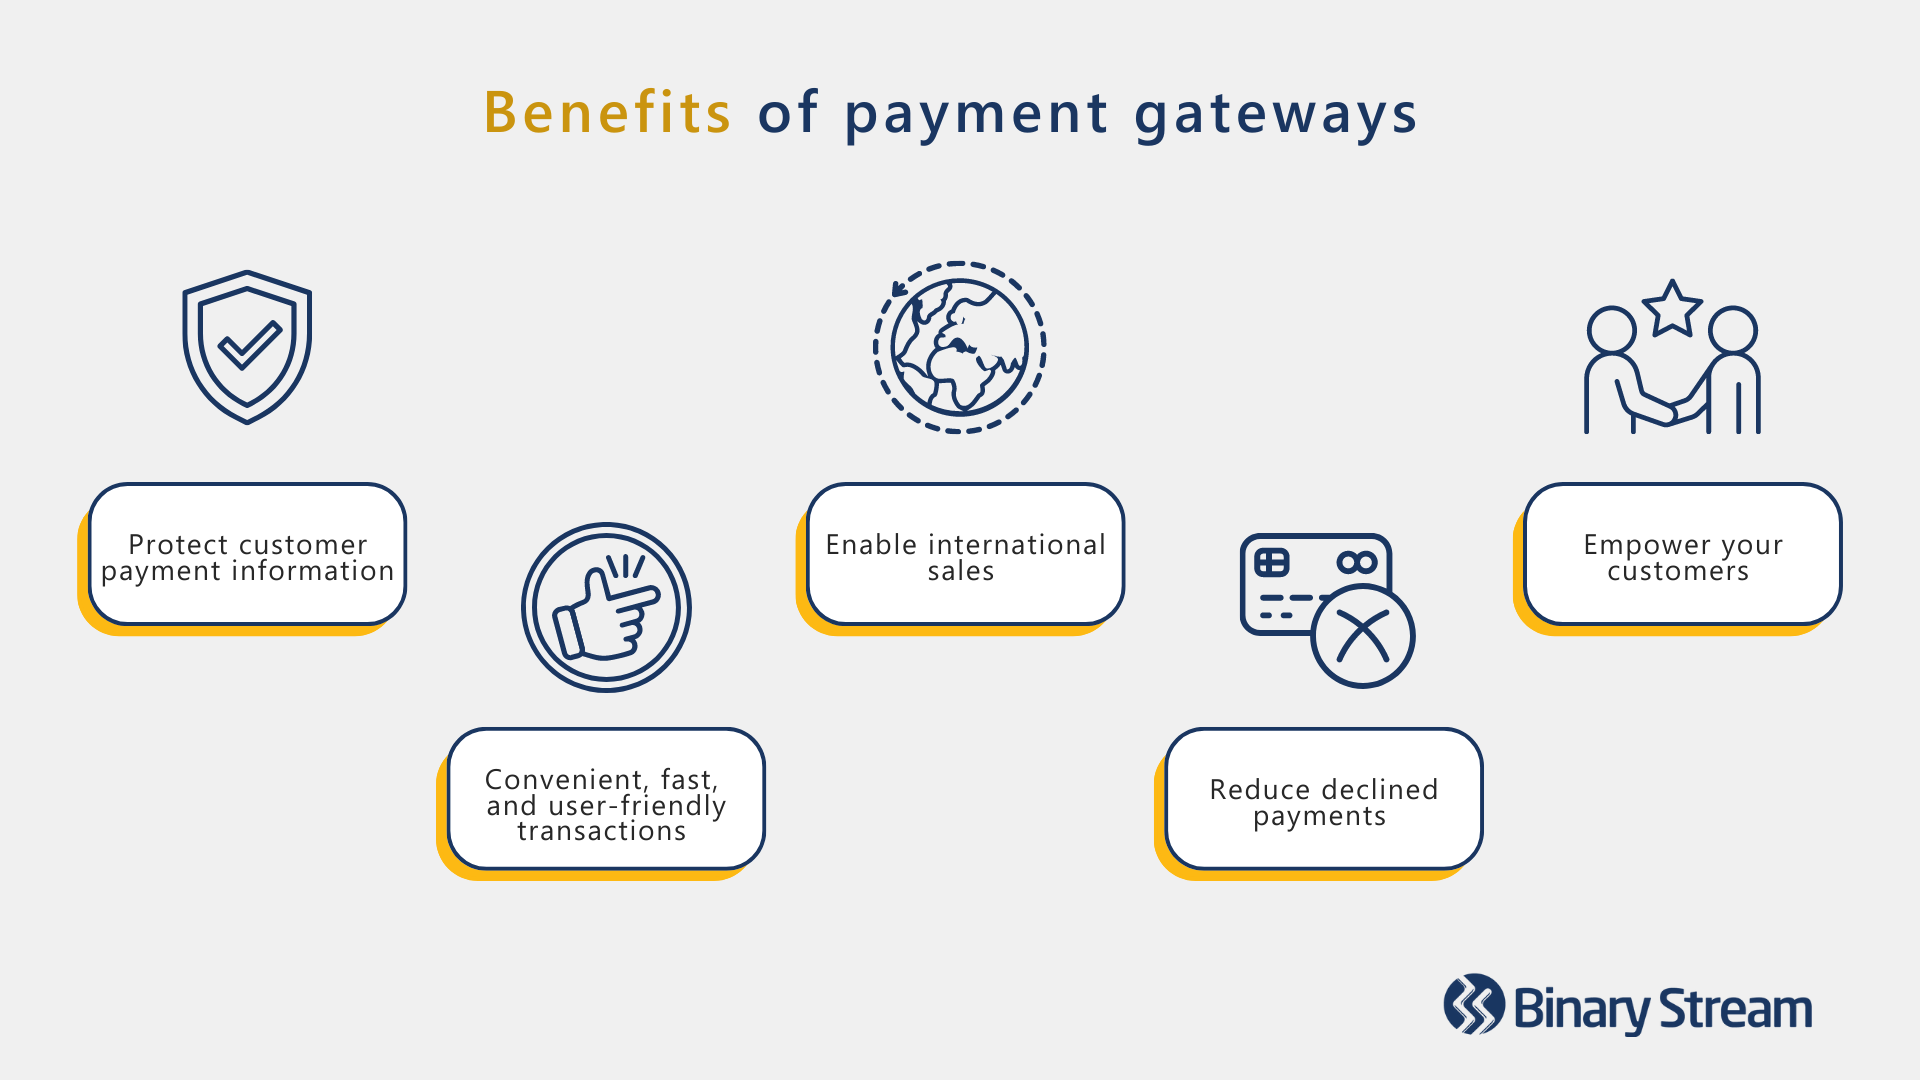 Top 5 benefits of payment gateways